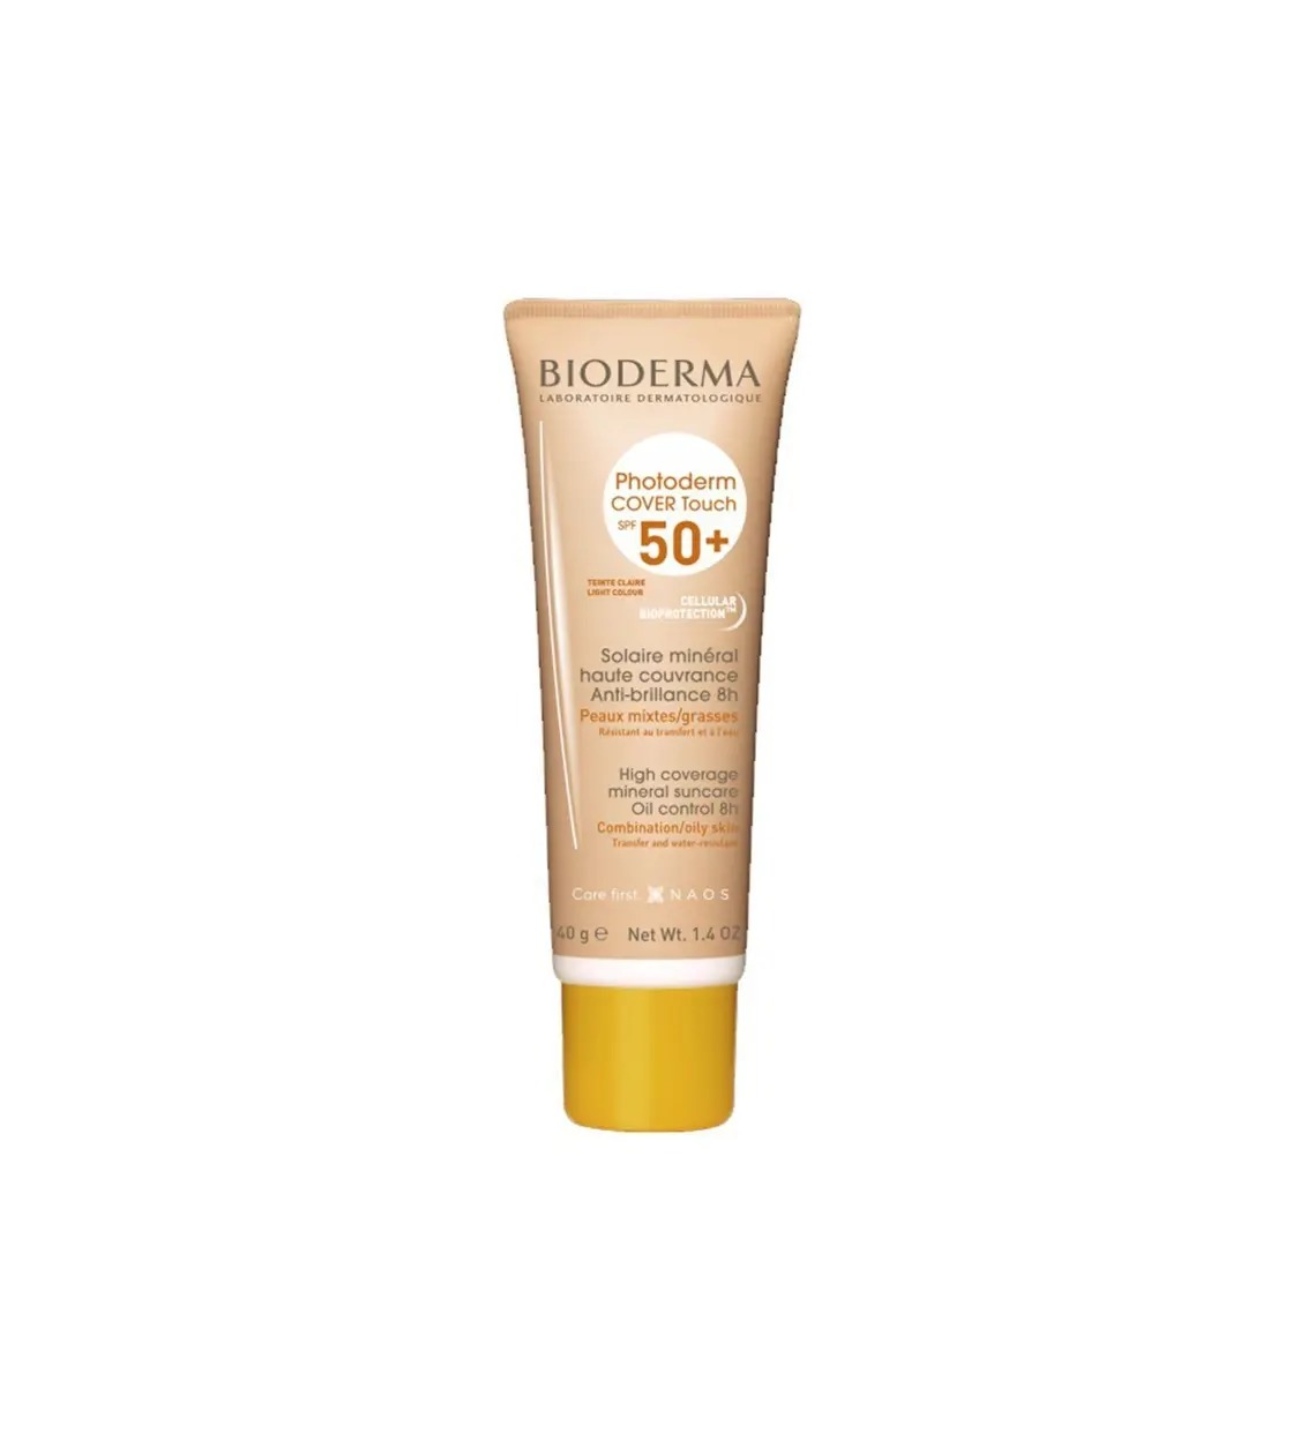 Bioderma Photoderm Cover Touch SPF50+ Claire Light 40g